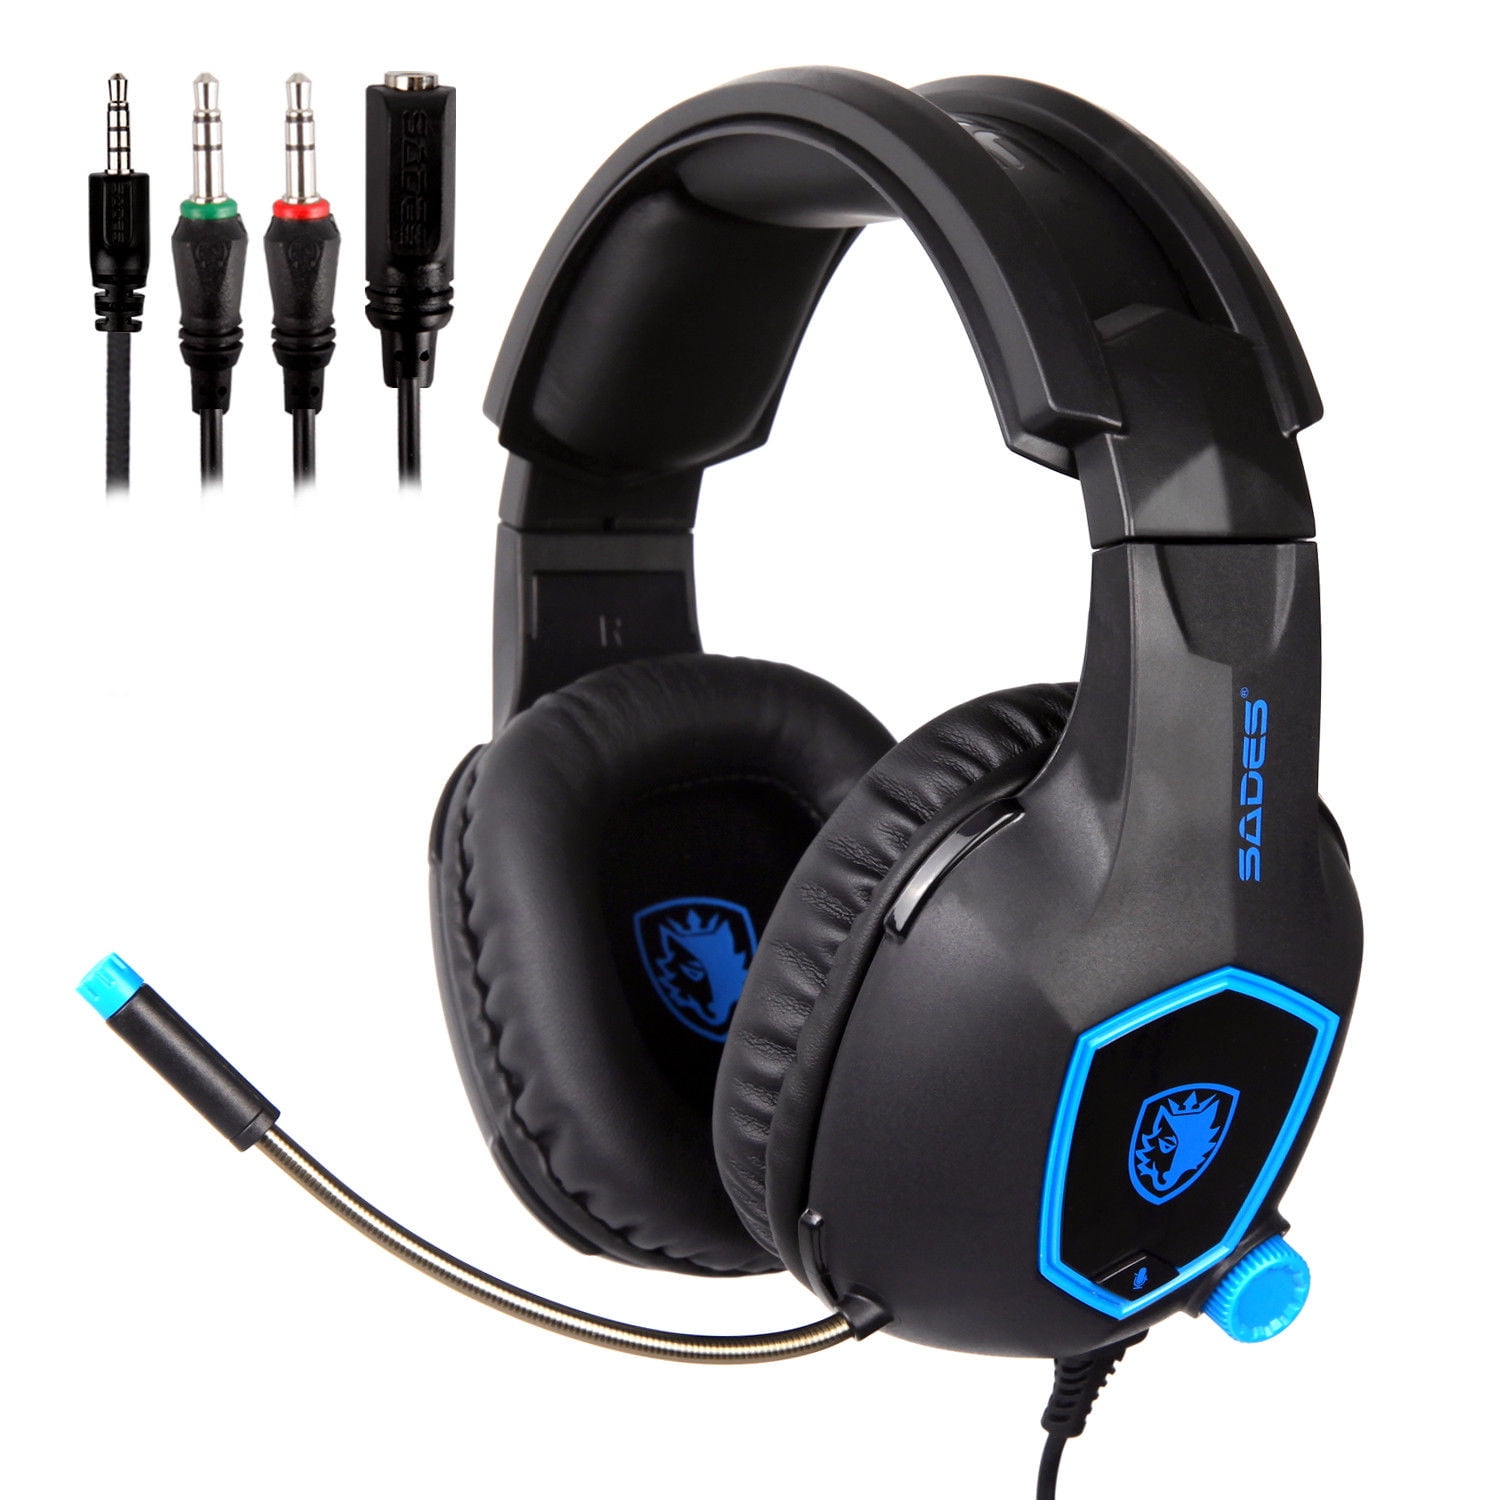 with SADES New Pro HiFi Mic for One Gaming Headset PC Headphone SA-818 Xbox PS4